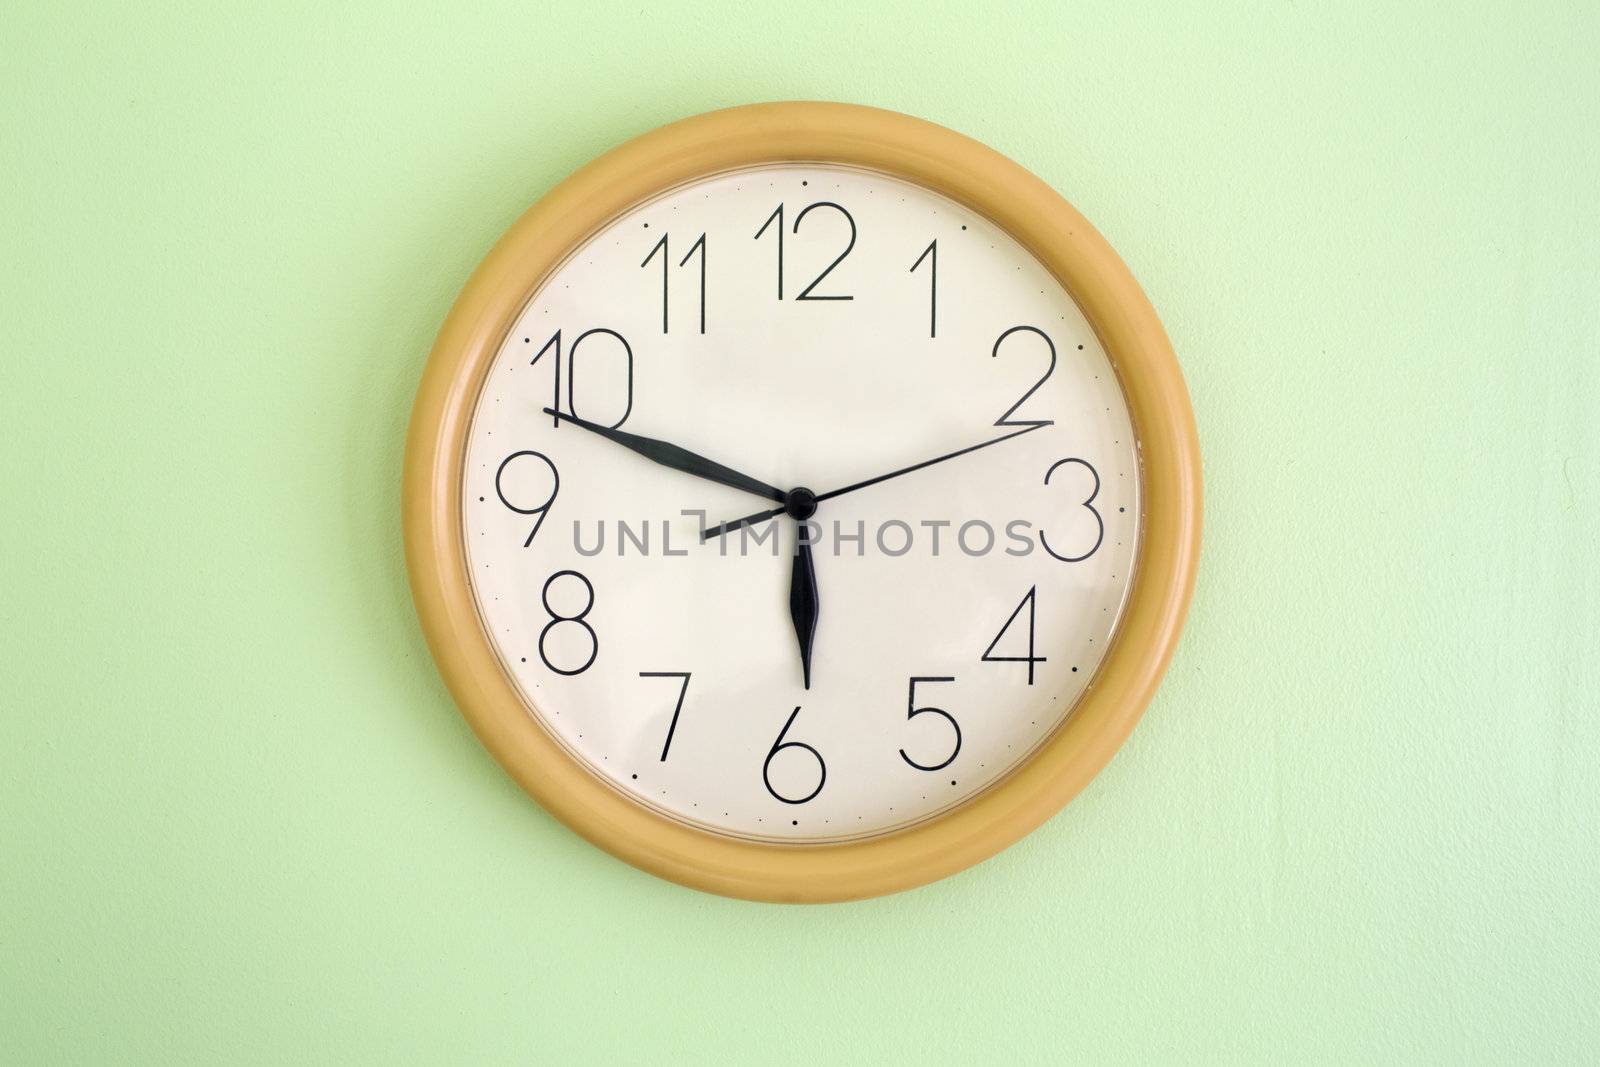 Clock hanging on wall and showing current time